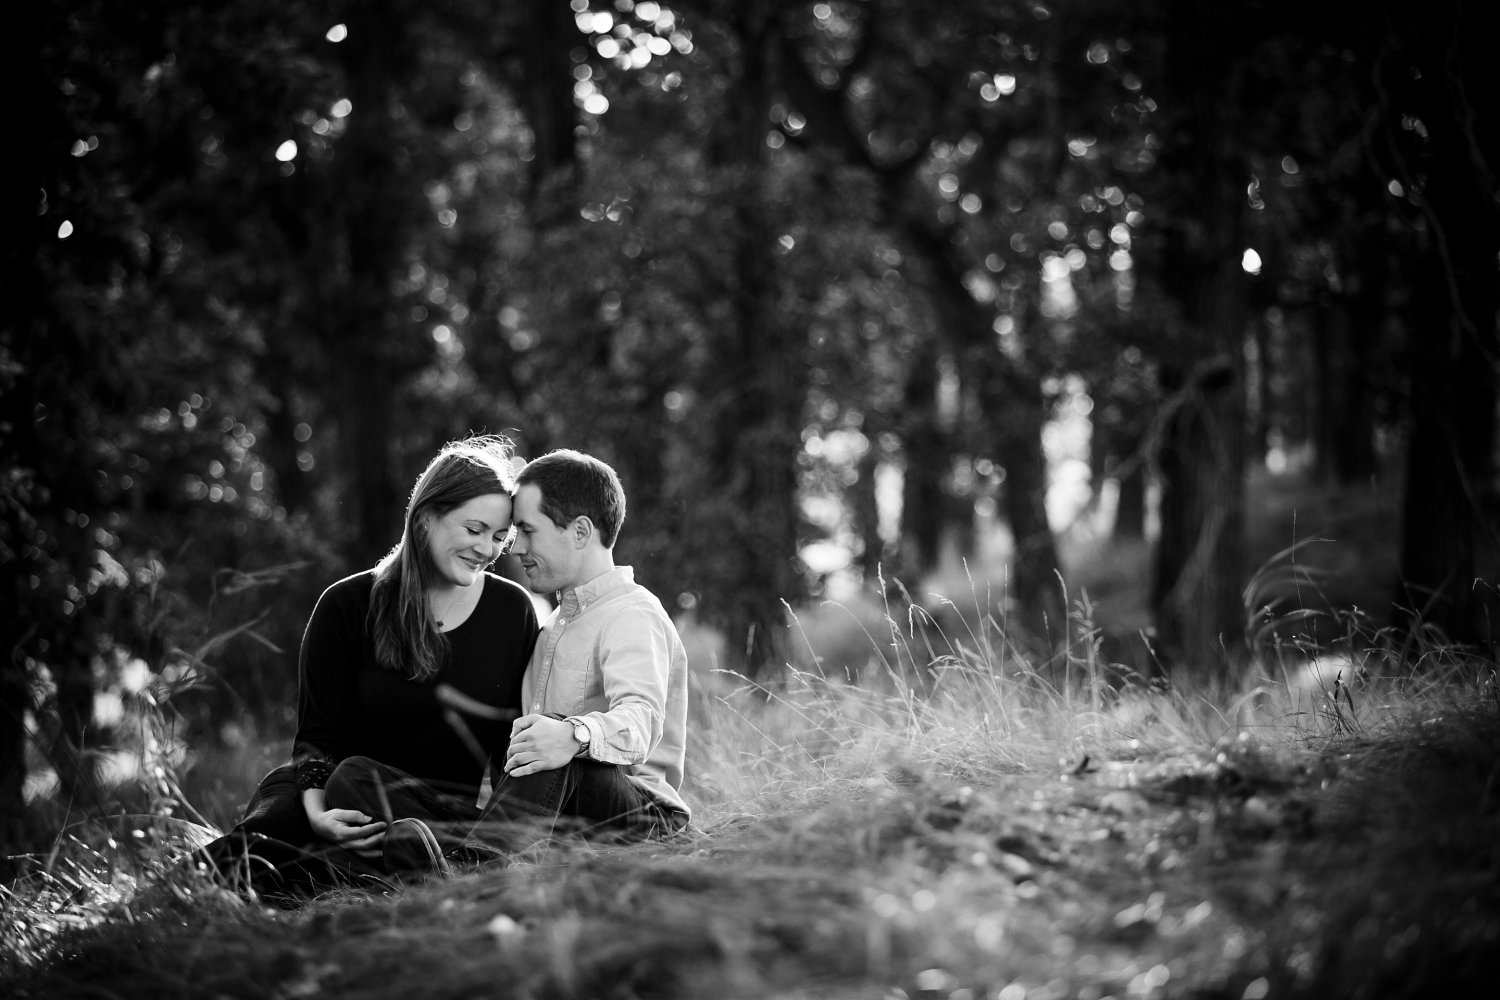 Pope farm woods engagement pictures